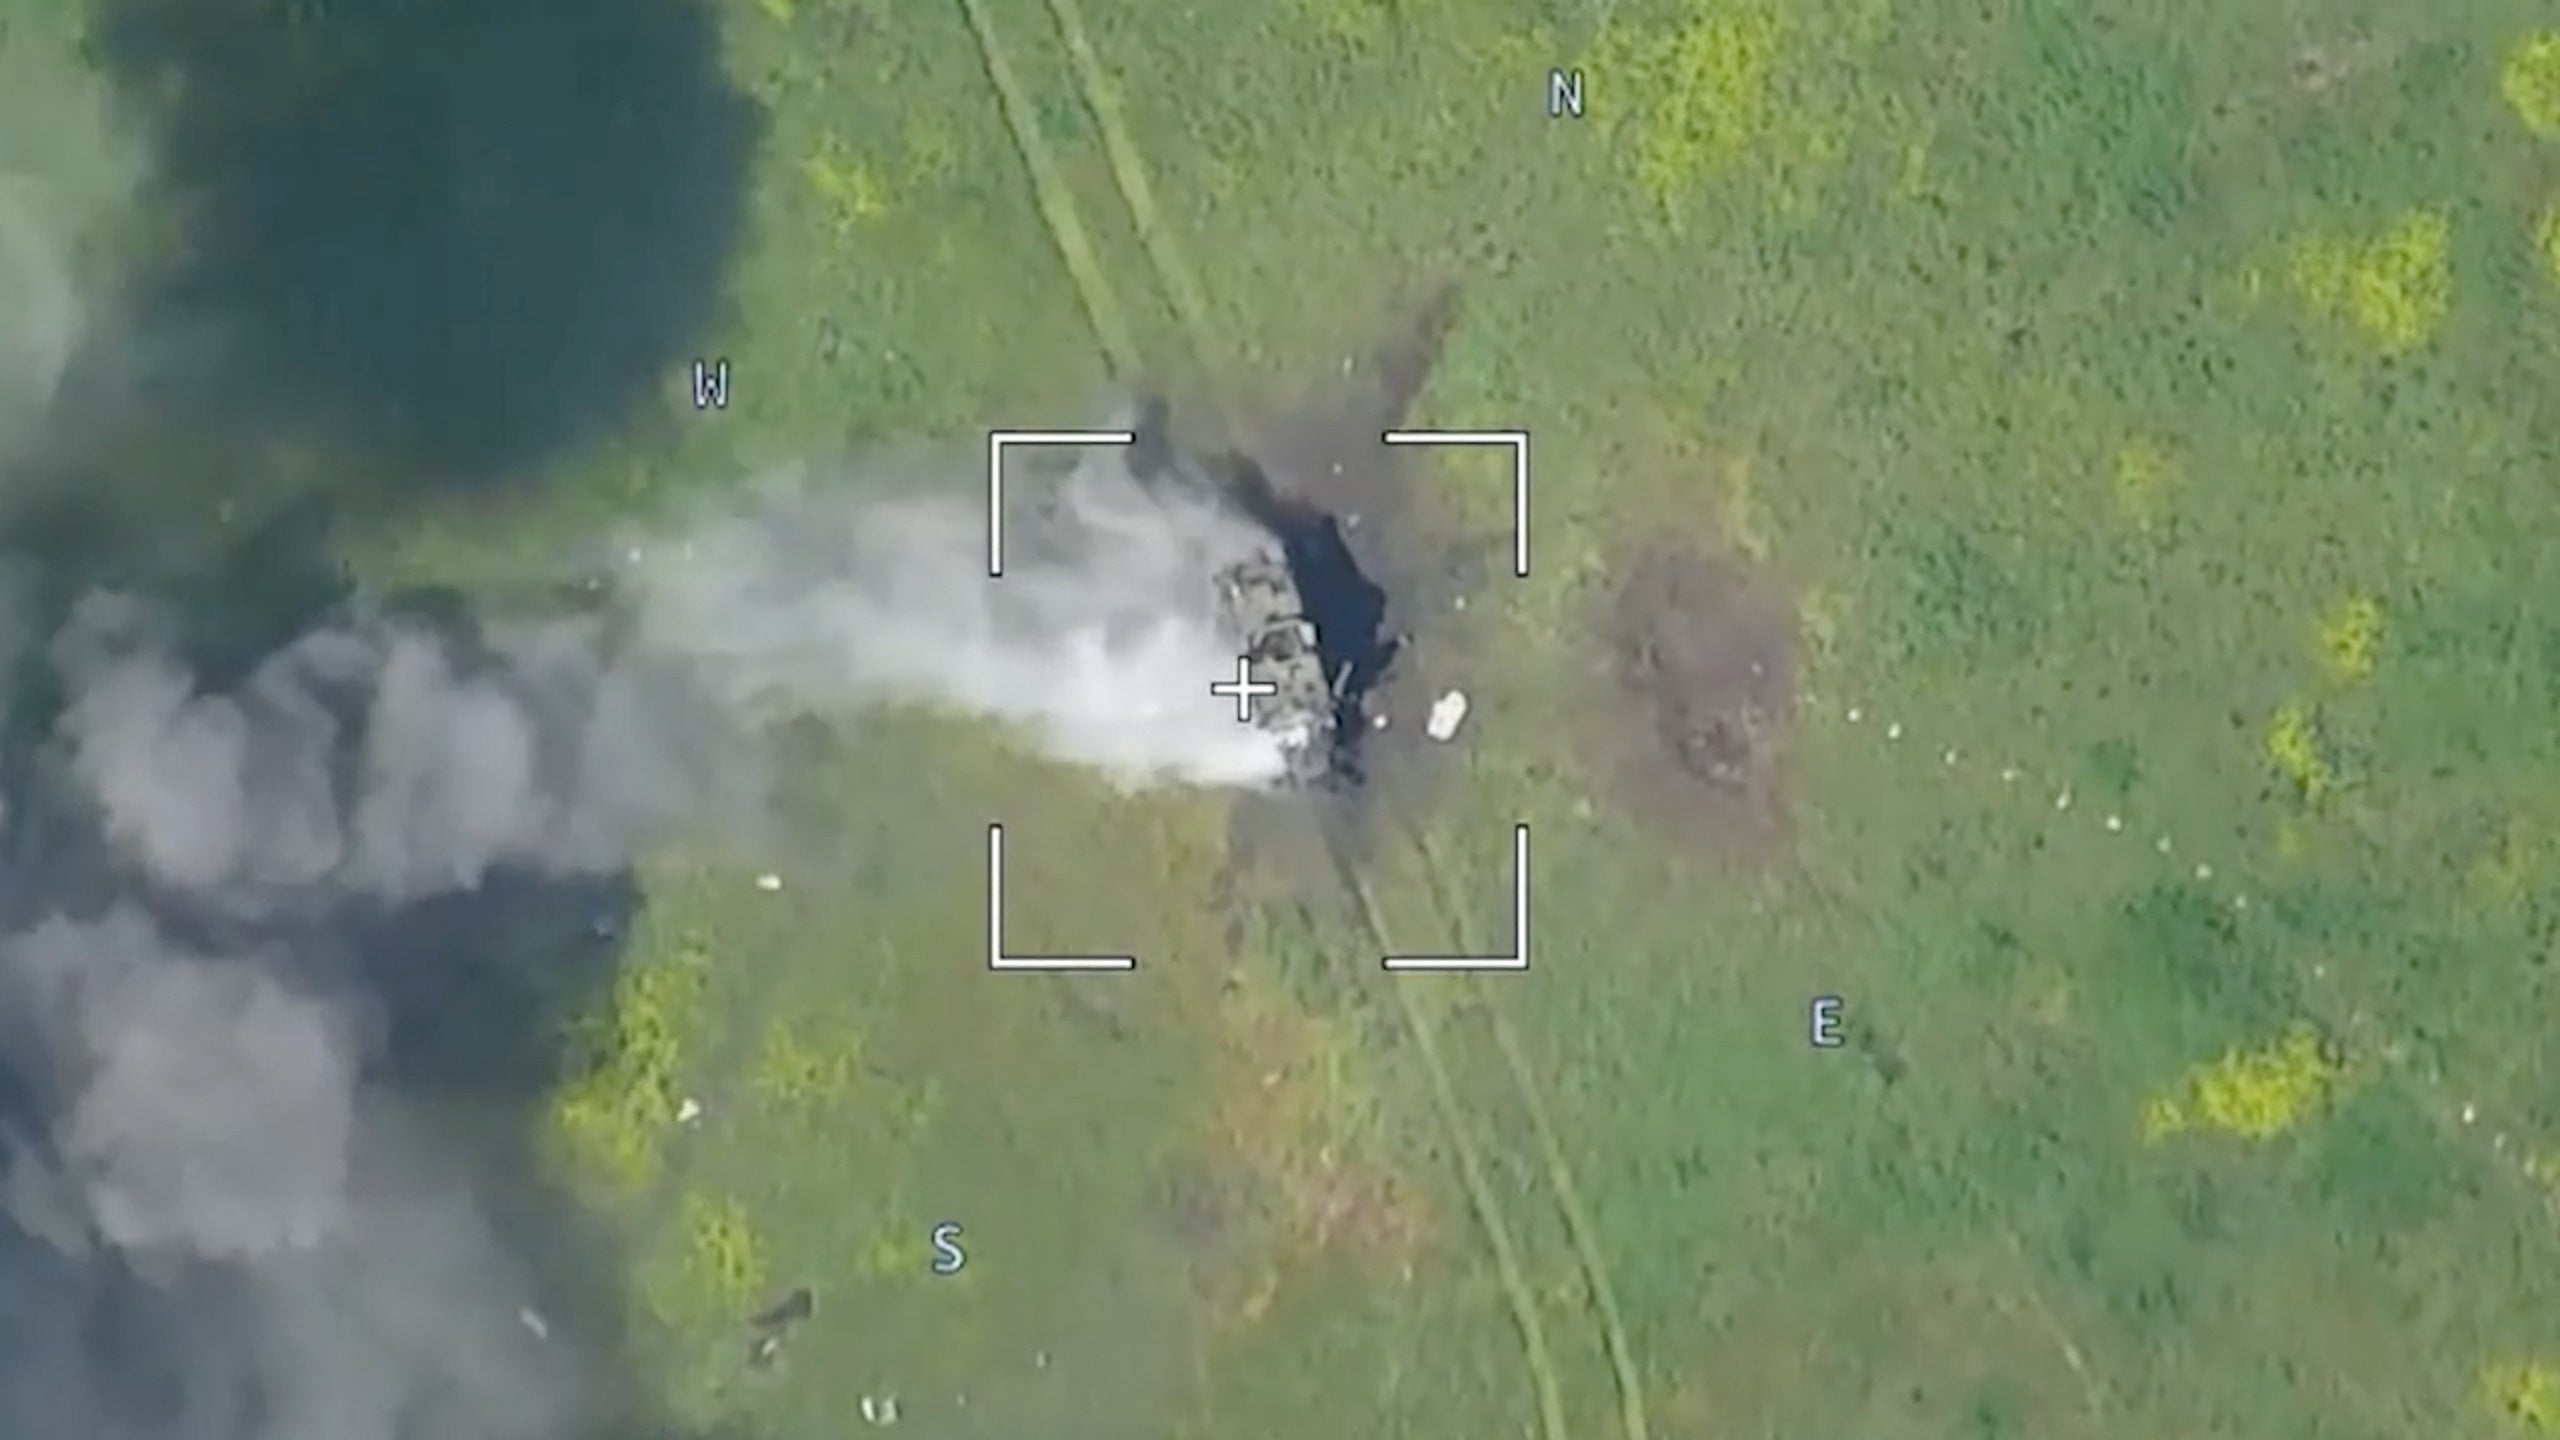 Drone footage shows a burning armored vehicle in an unidentified location after the Defence Ministry in Moscow 